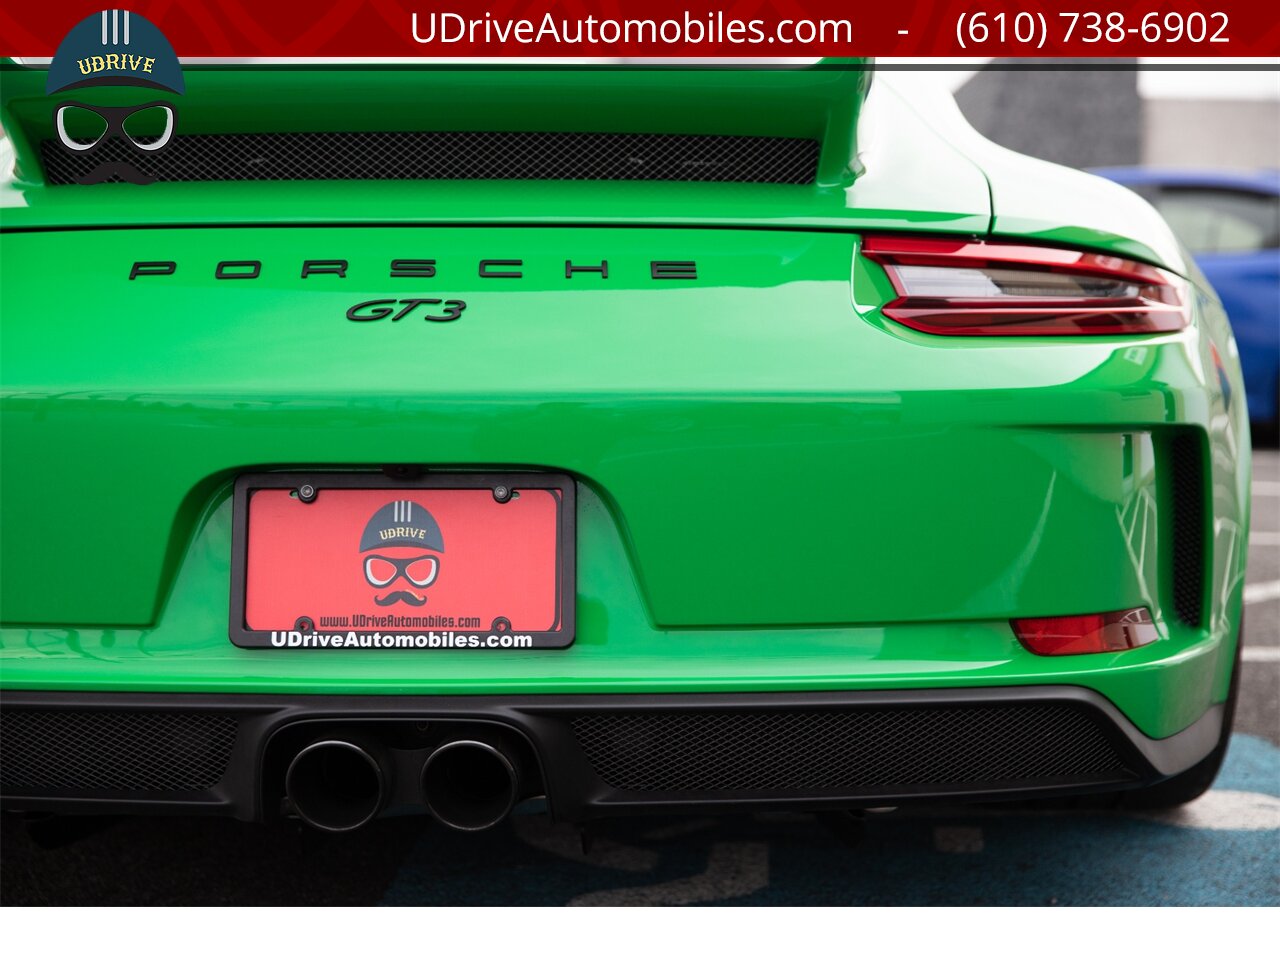 2018 Porsche 911 GT3 6 Speed Paint To Sample Viper Green 48 Miles  Front Axle Lift PCCB Carbon Bucket Seats - Photo 19 - West Chester, PA 19382